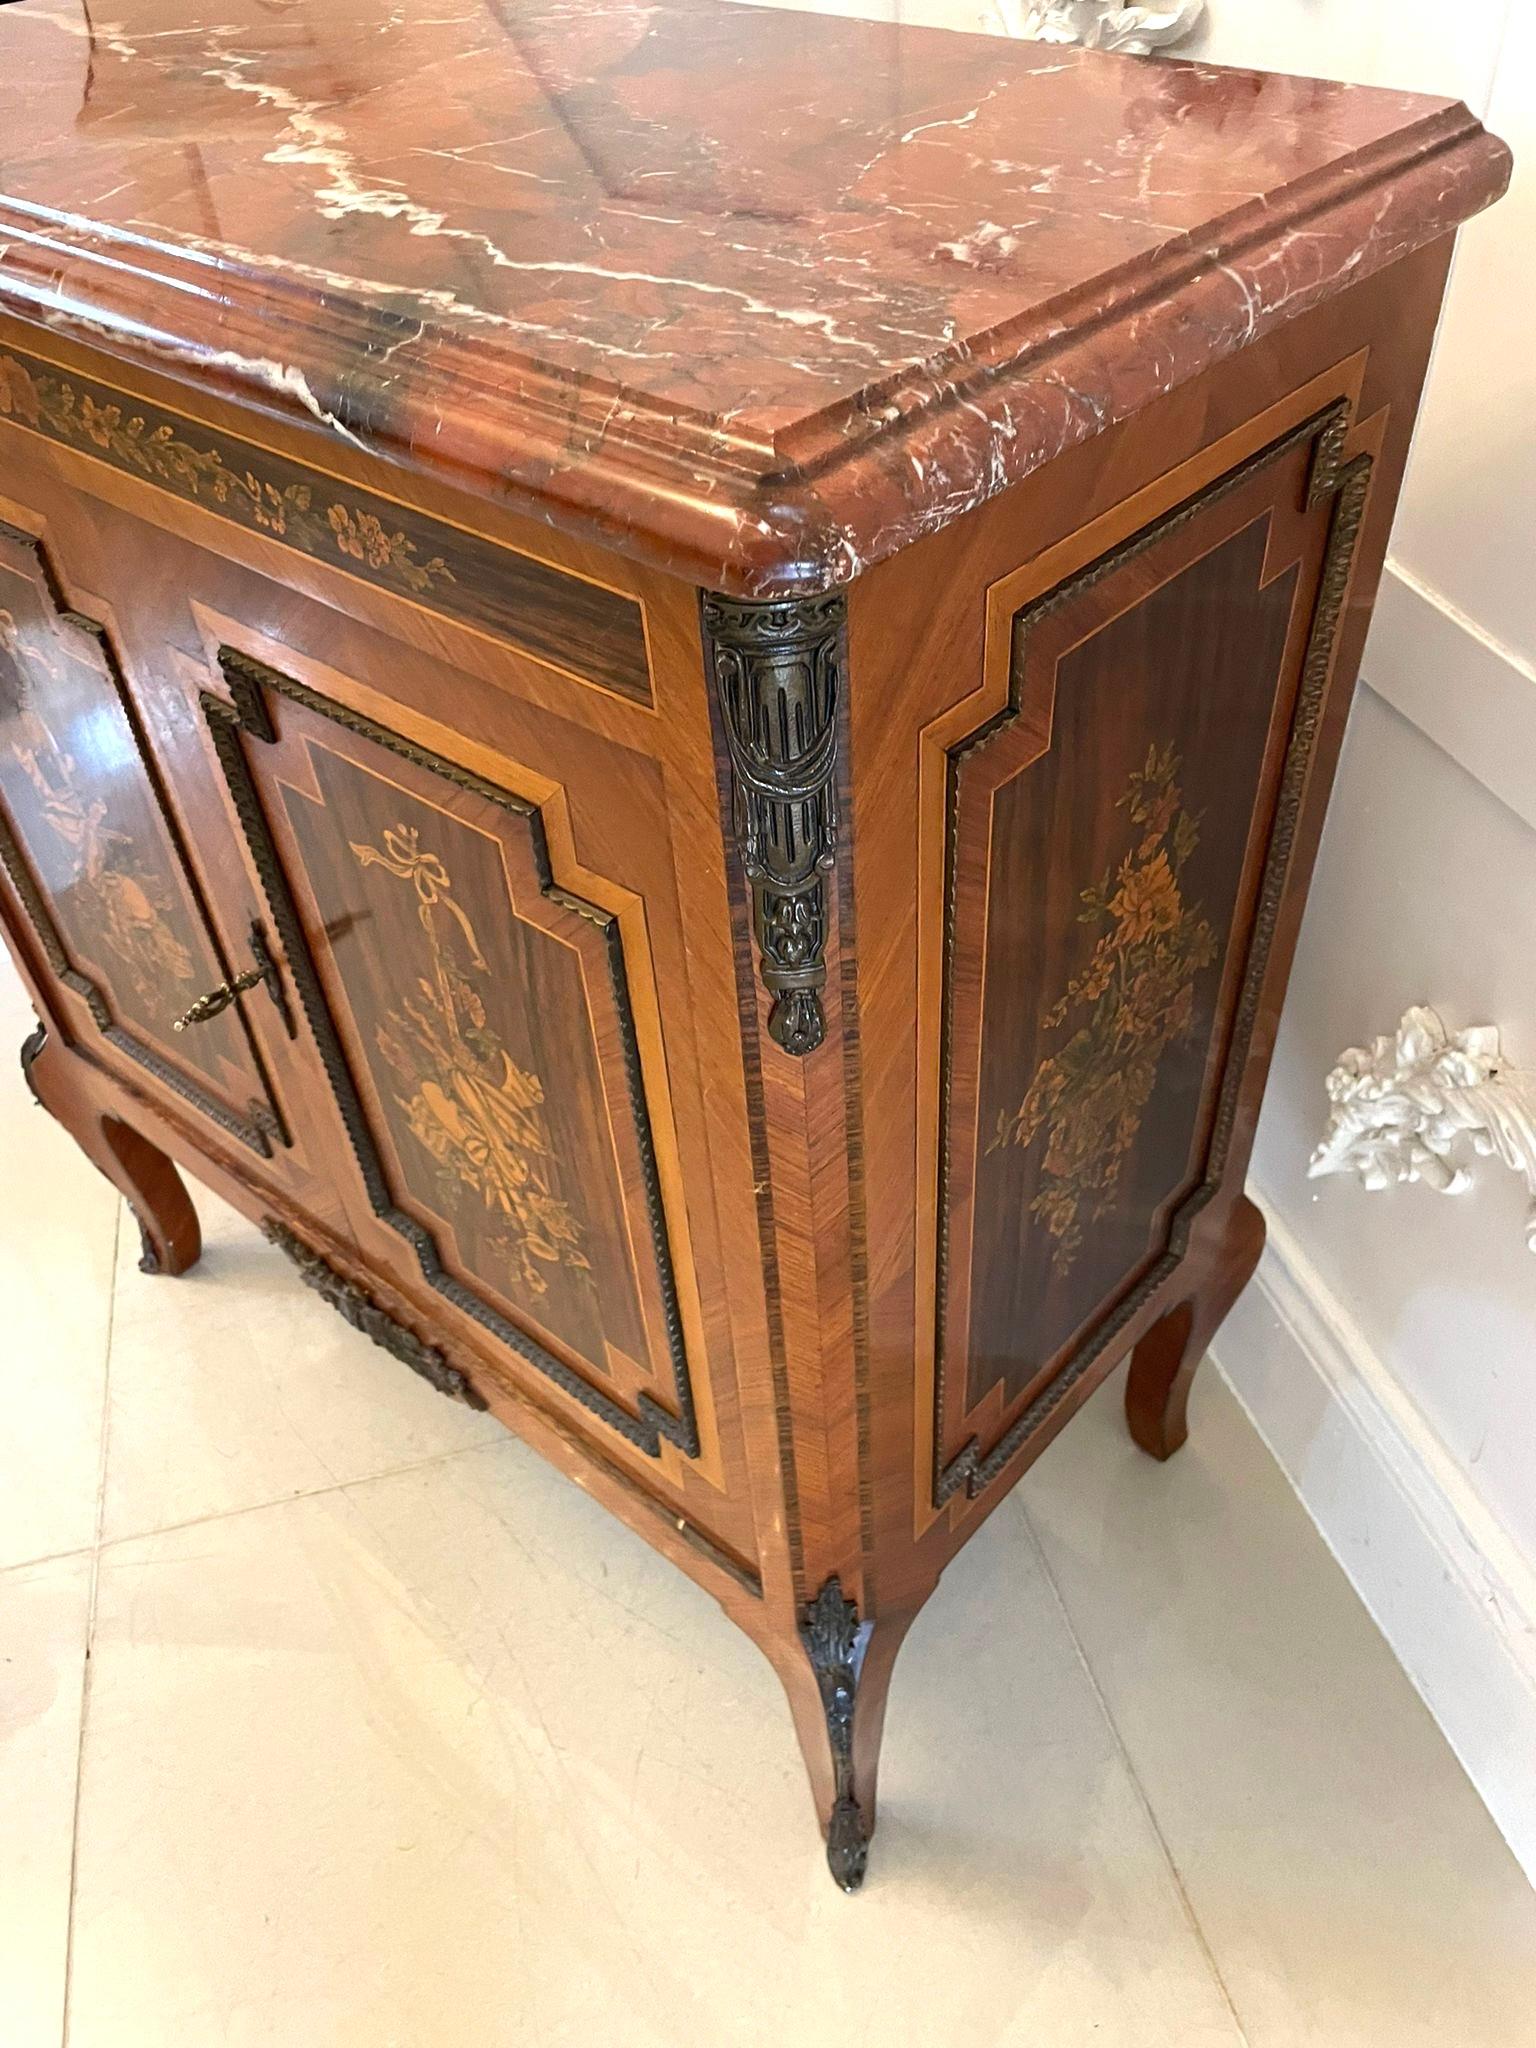 Antique Edwardian superior quality French kingwood and marquetry inlaid side cabinet having a beautiful marble top with a moulded edge above a marquetry inlaid frieze above a pair of outstanding quality marquetry inlaid panelled doors with ornate